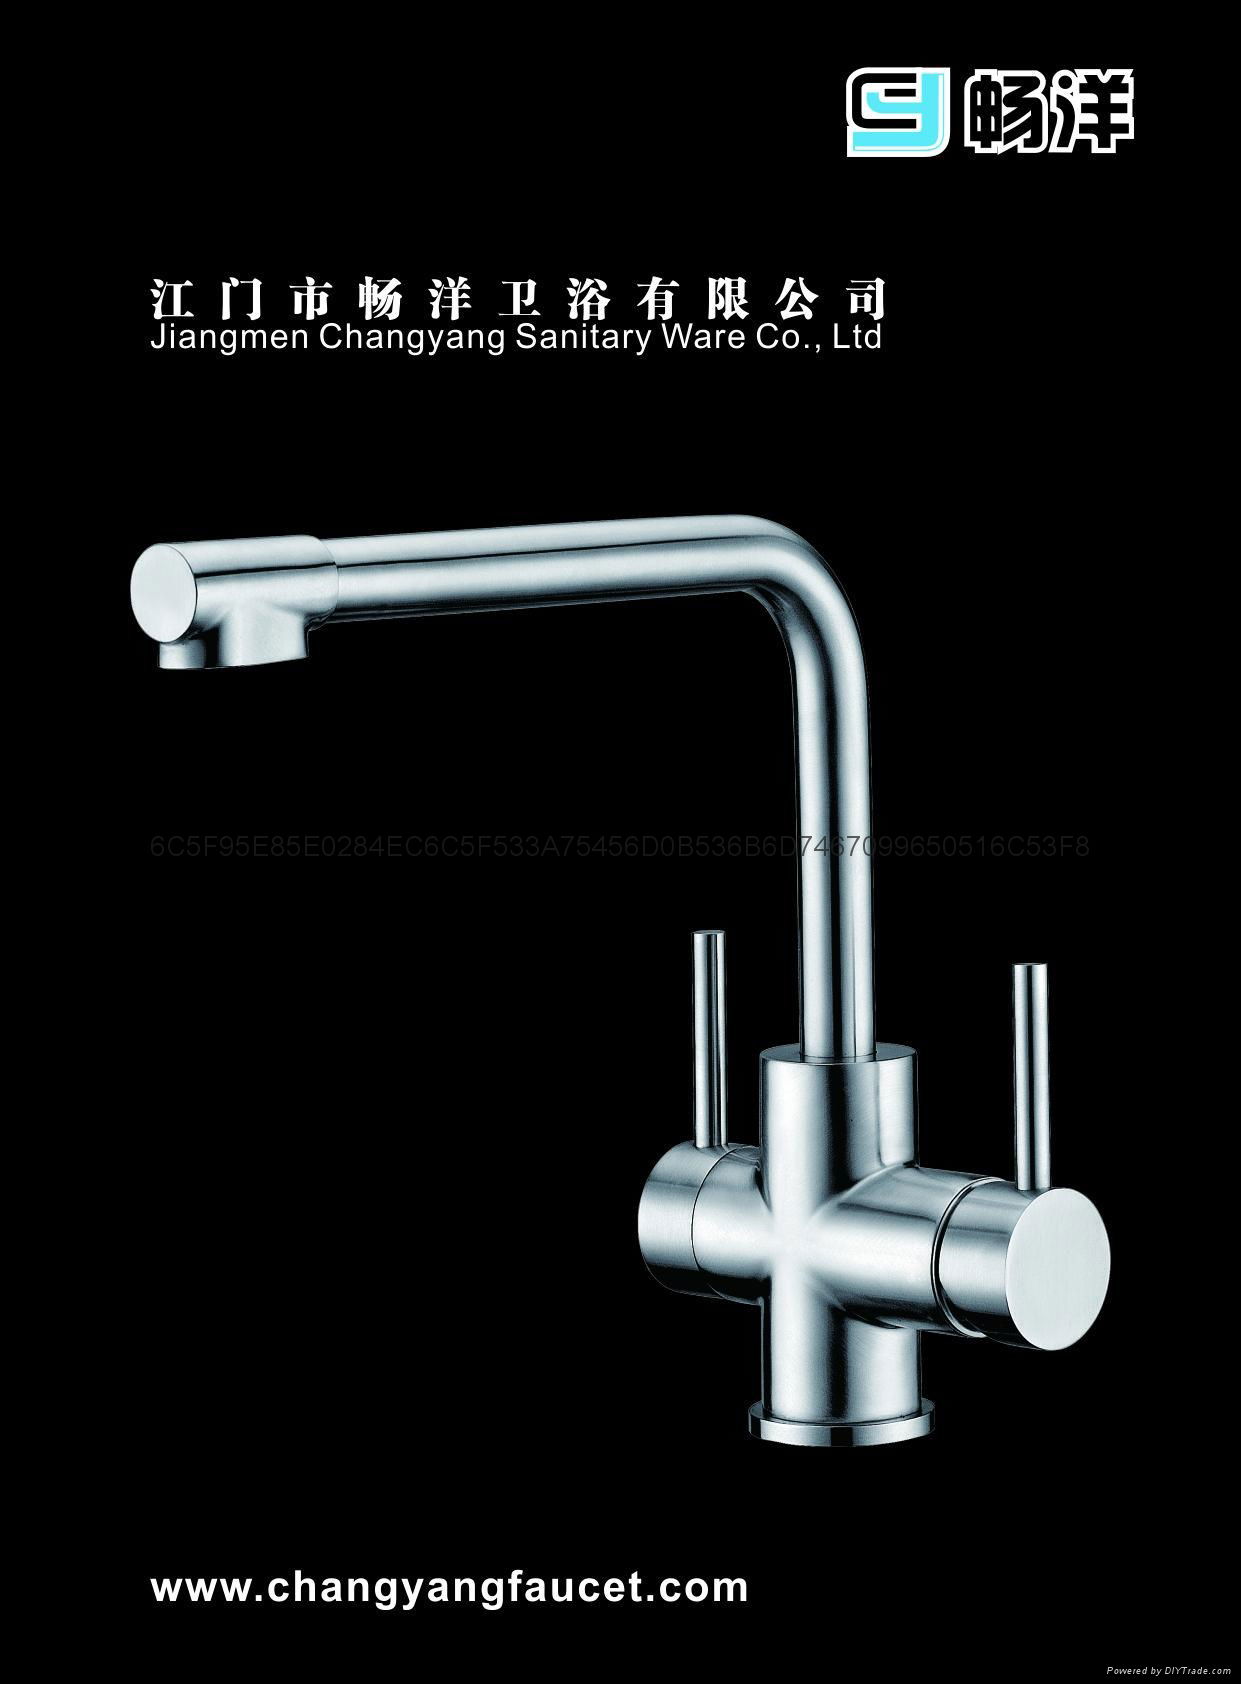 Cold and hot water kitchen faucet